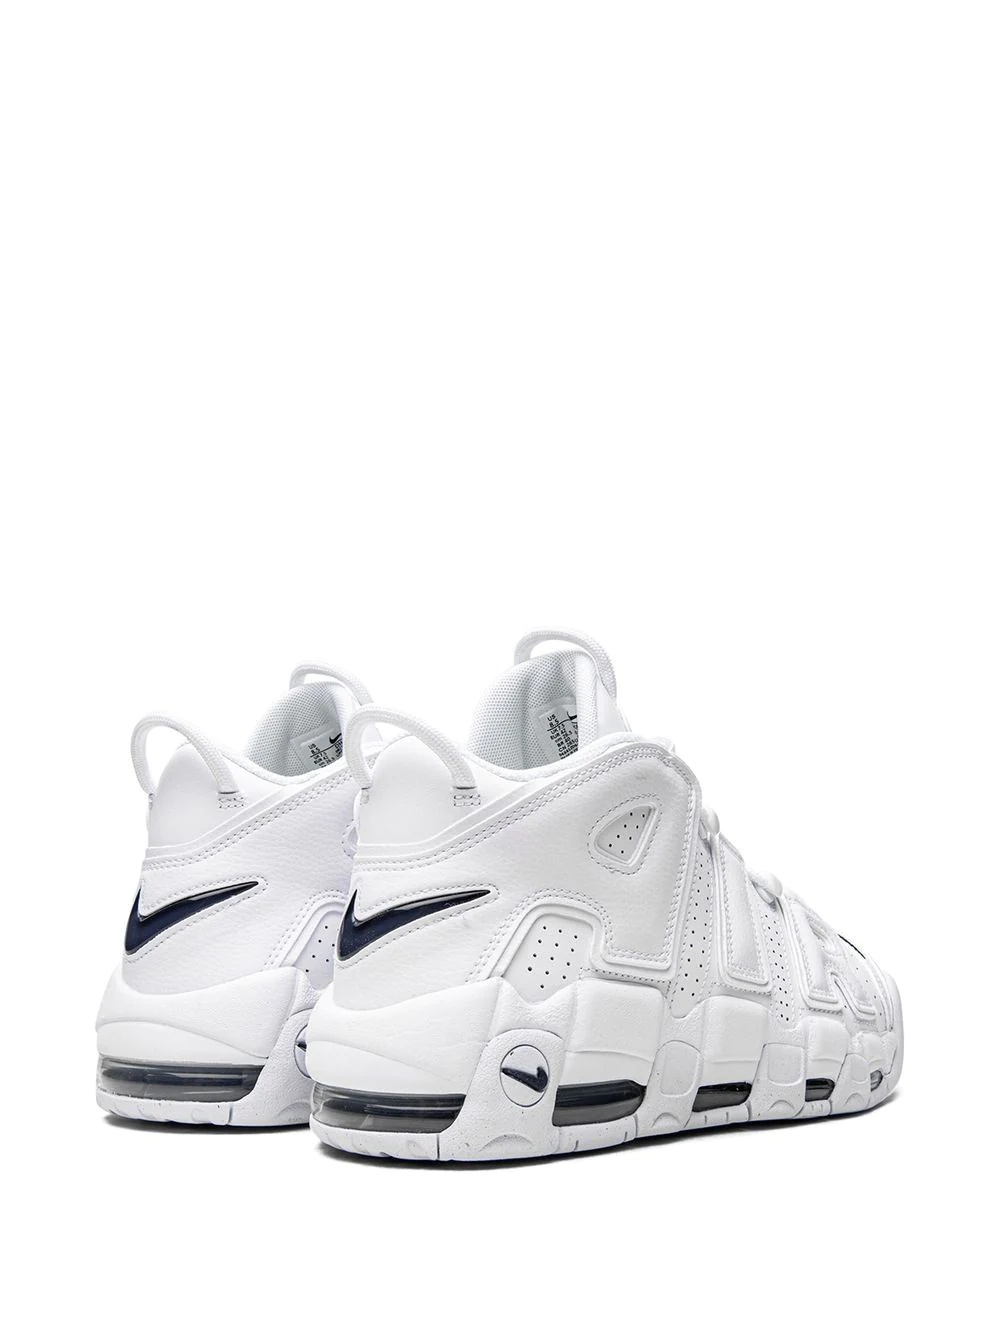 Air More Uptempo "White/Midnight Navy" sneakers - 3